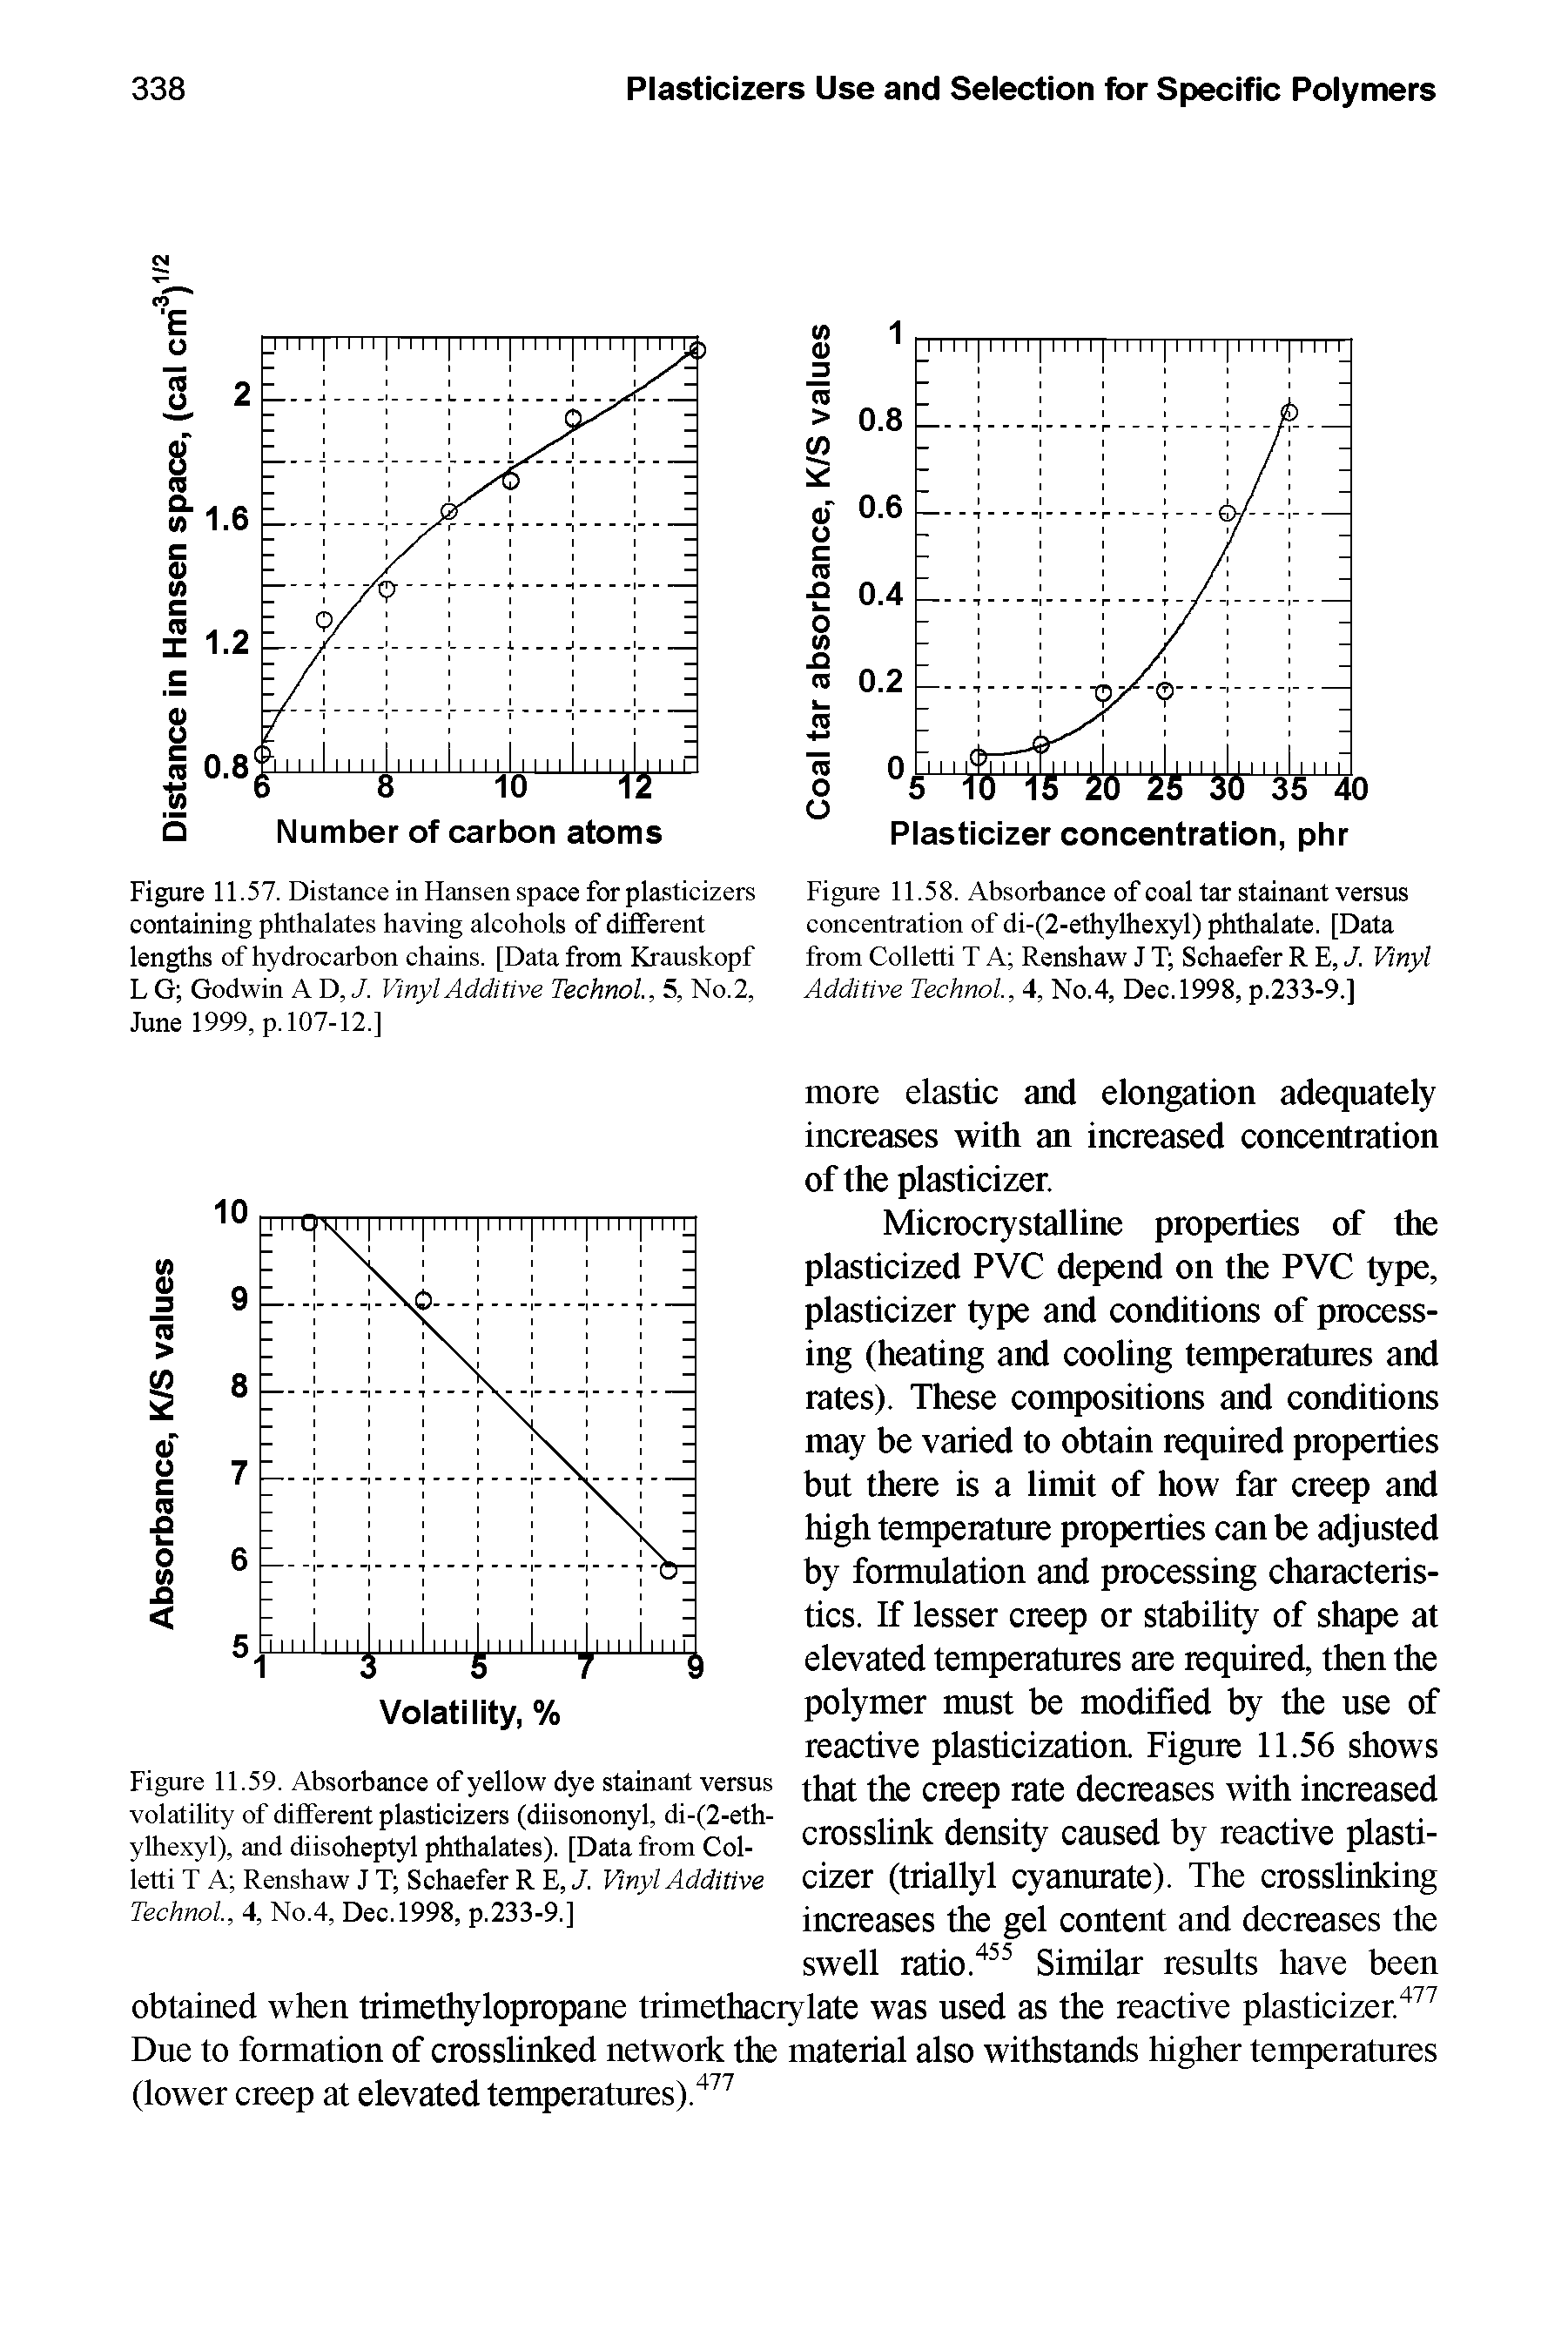 Figure 11.59. Absorbance of yellow dye stainant versus volatility of different plasticizers (diisononyl, di-(2-eth-ylhexyl), and diisoheptyl phthalates). [Data from Col-letti T A Renshaw J T Schaefer R E, J. Vinyl Additive Technol, 4, No.4, Dec. 1998, p.233-9.]...